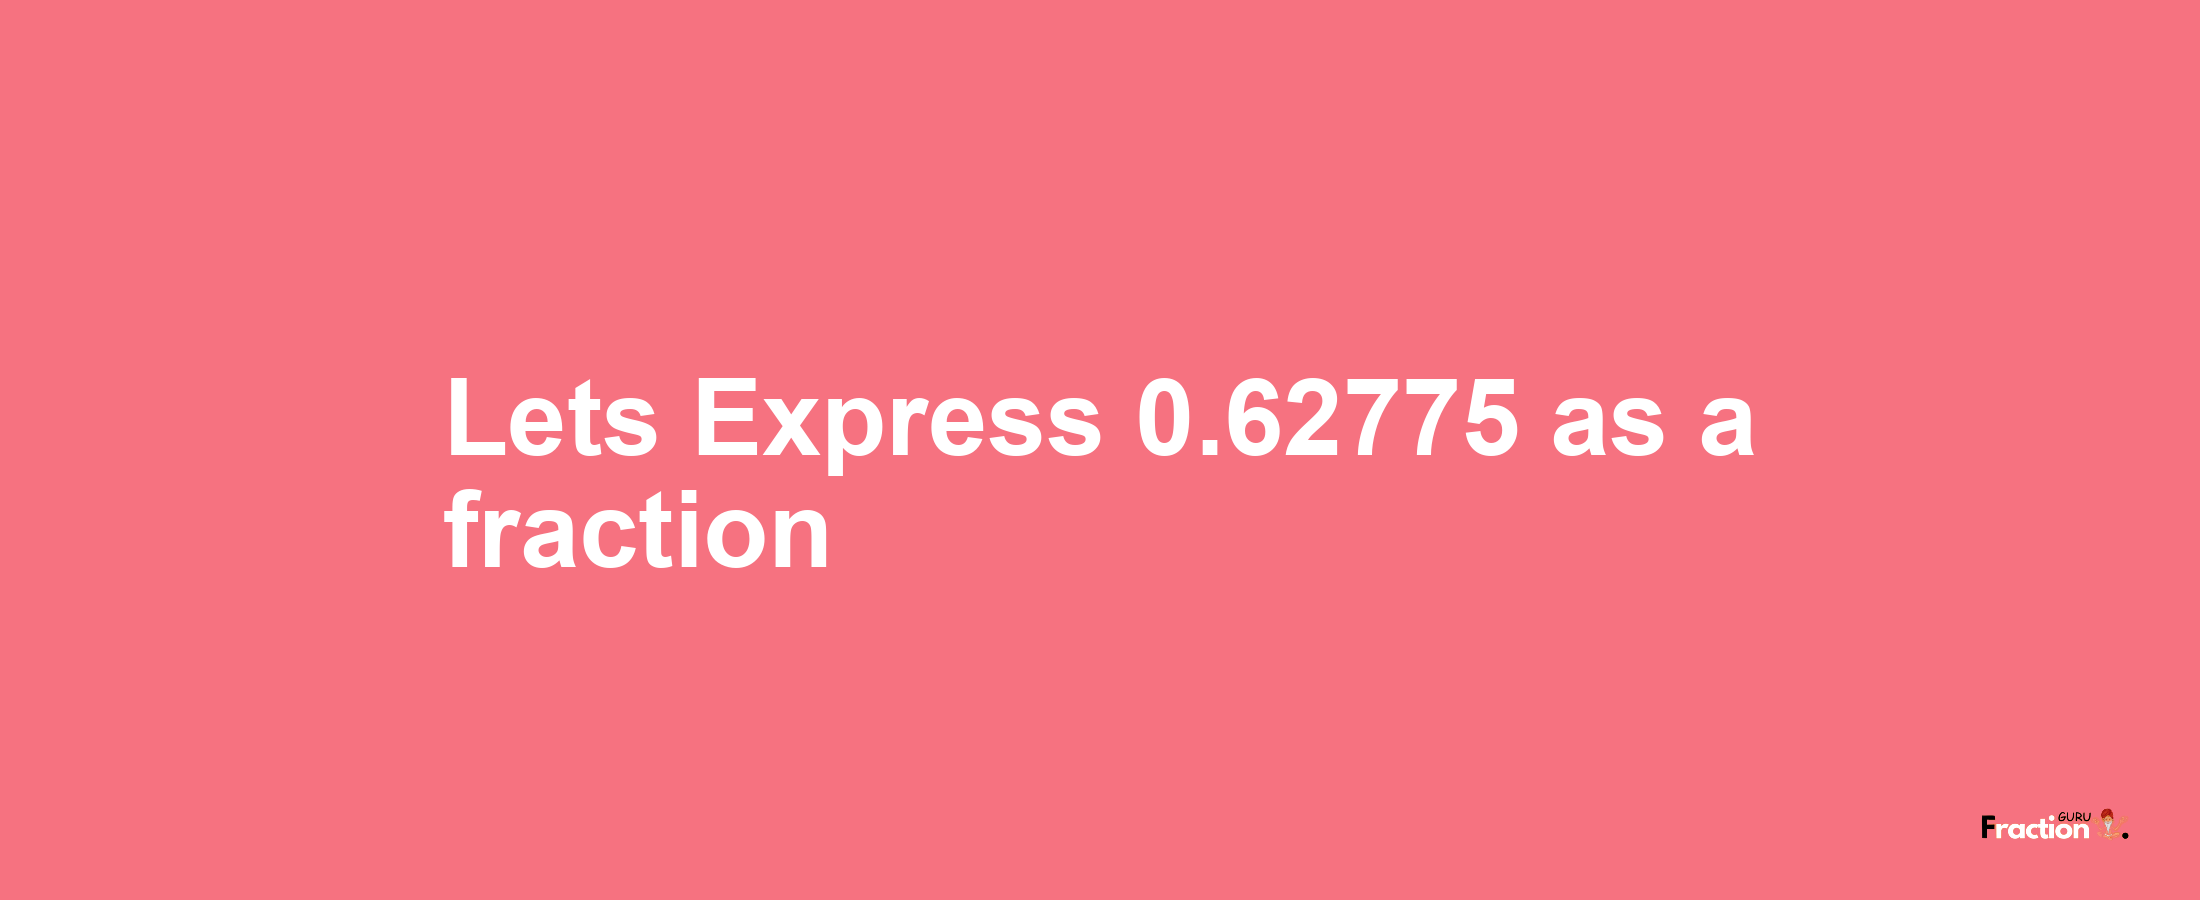 Lets Express 0.62775 as afraction